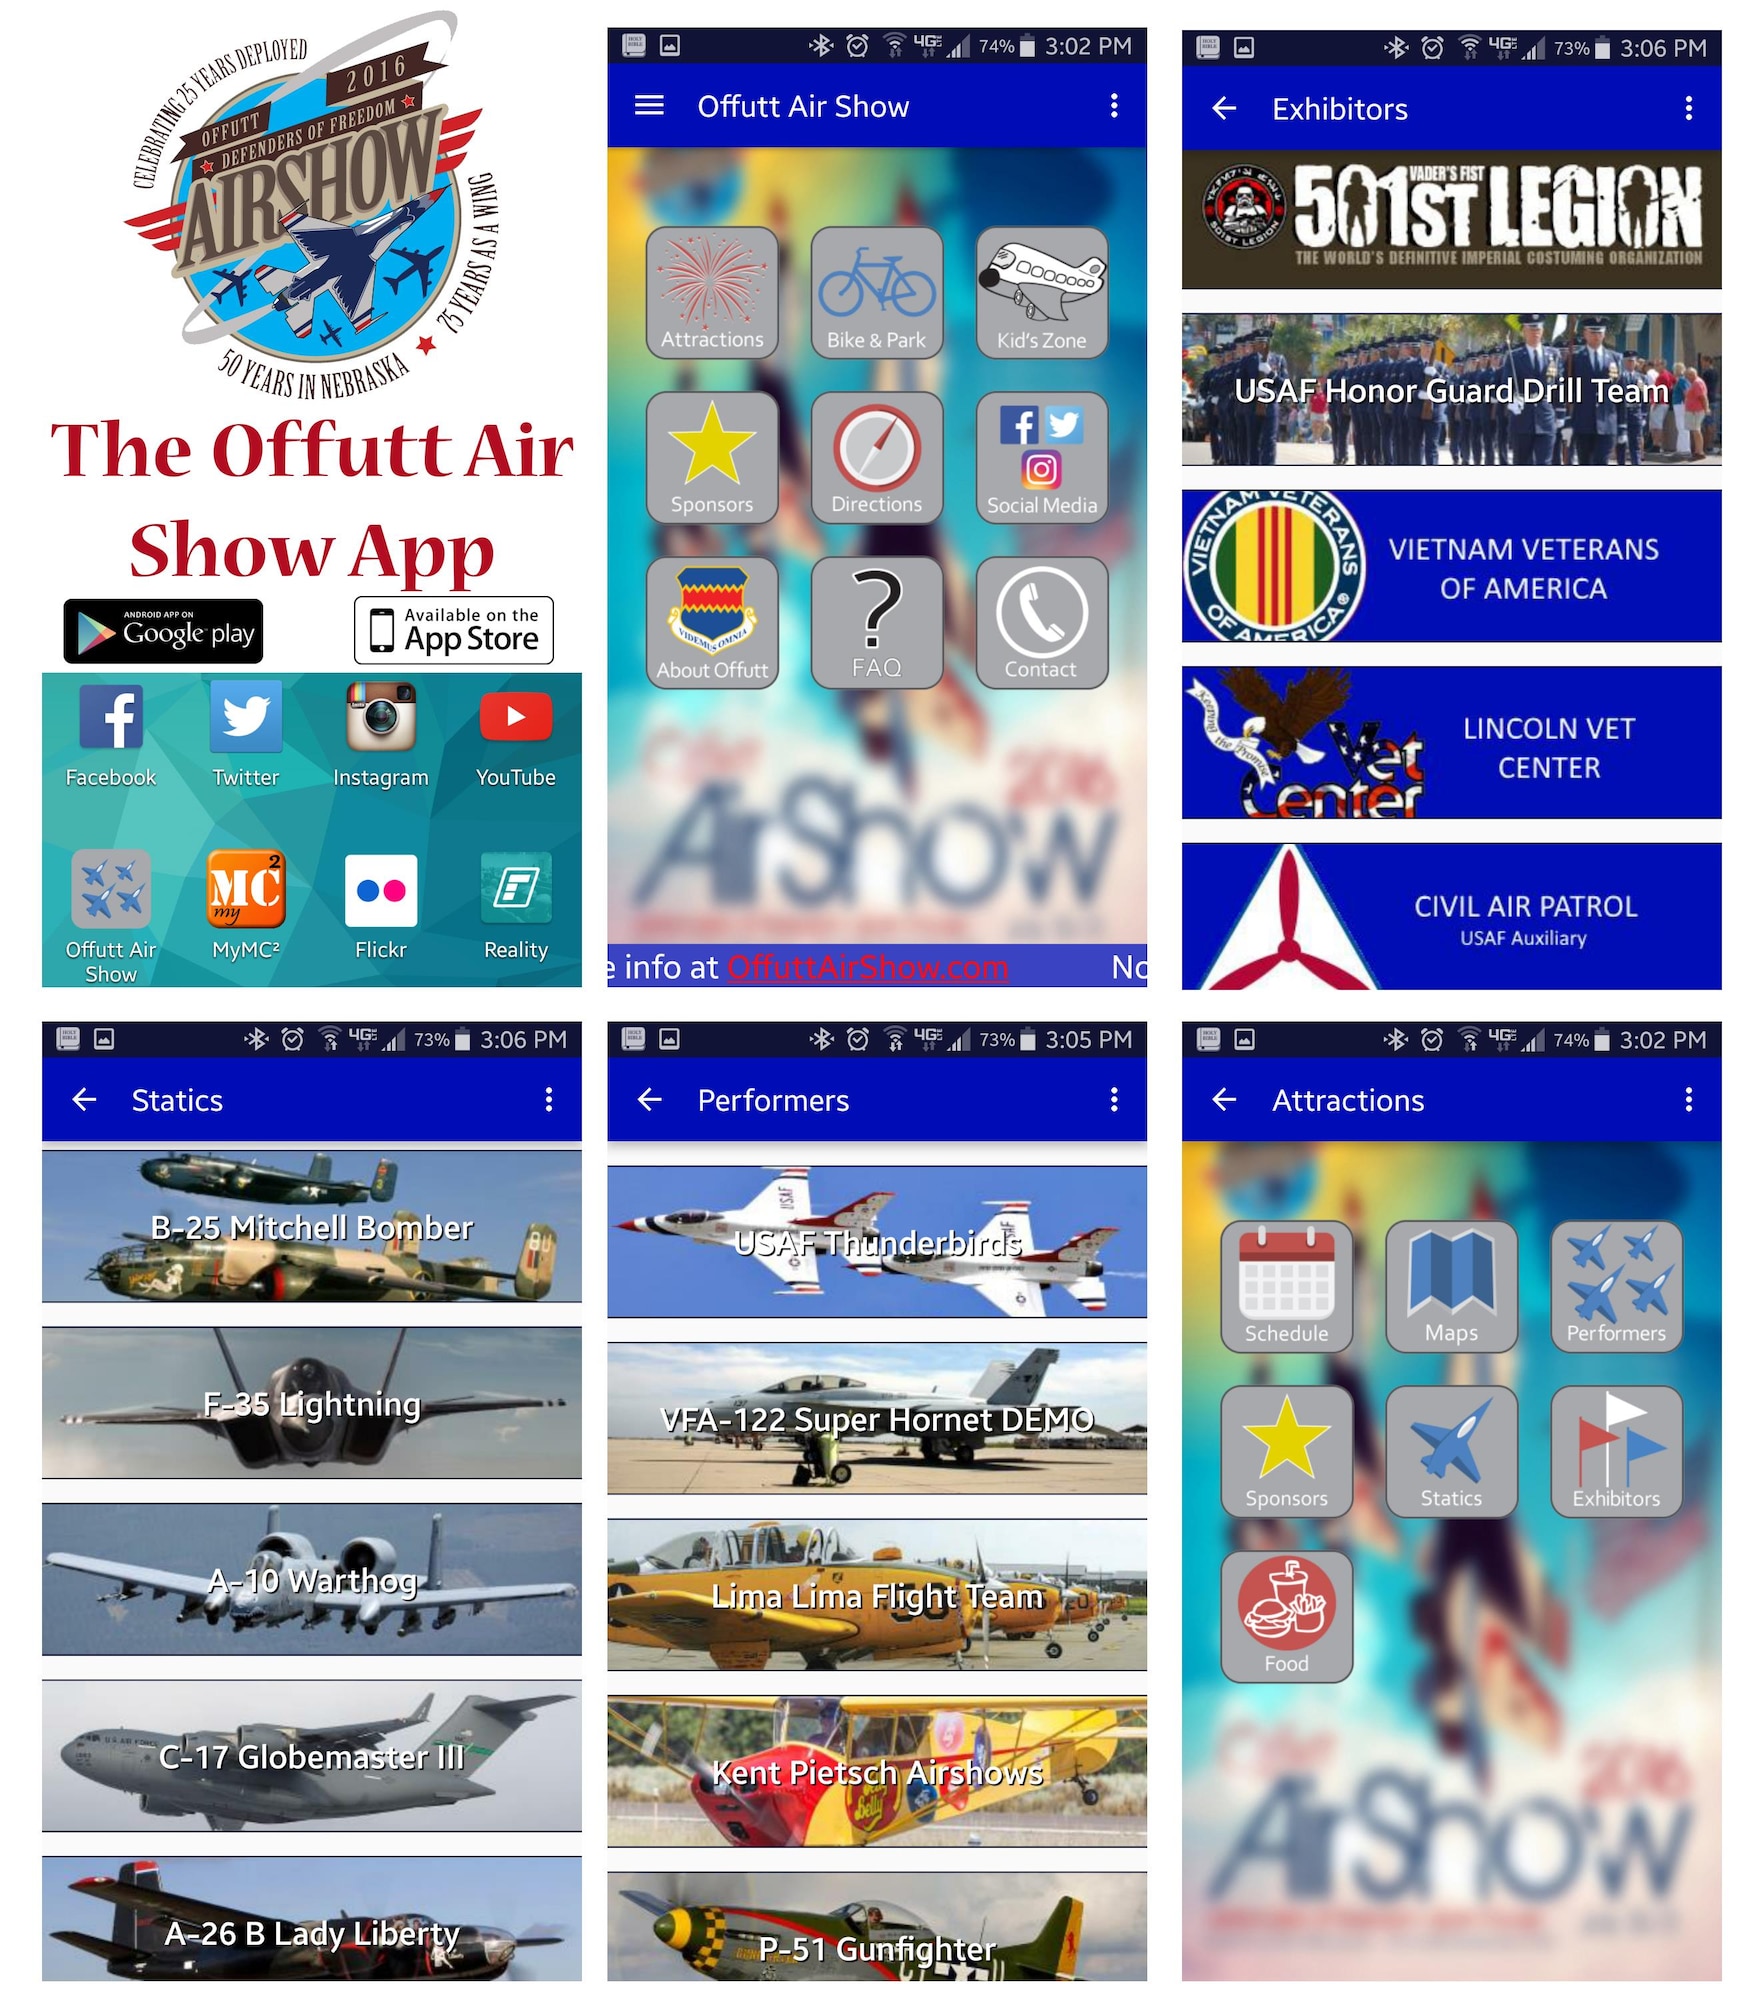 For 2016 there is a new App to help patron learn more about and find their way around the Offutt Air Show. Learn all about the features of this new App to include performers, static displays, maps, directions and more. (Photo Illustration)